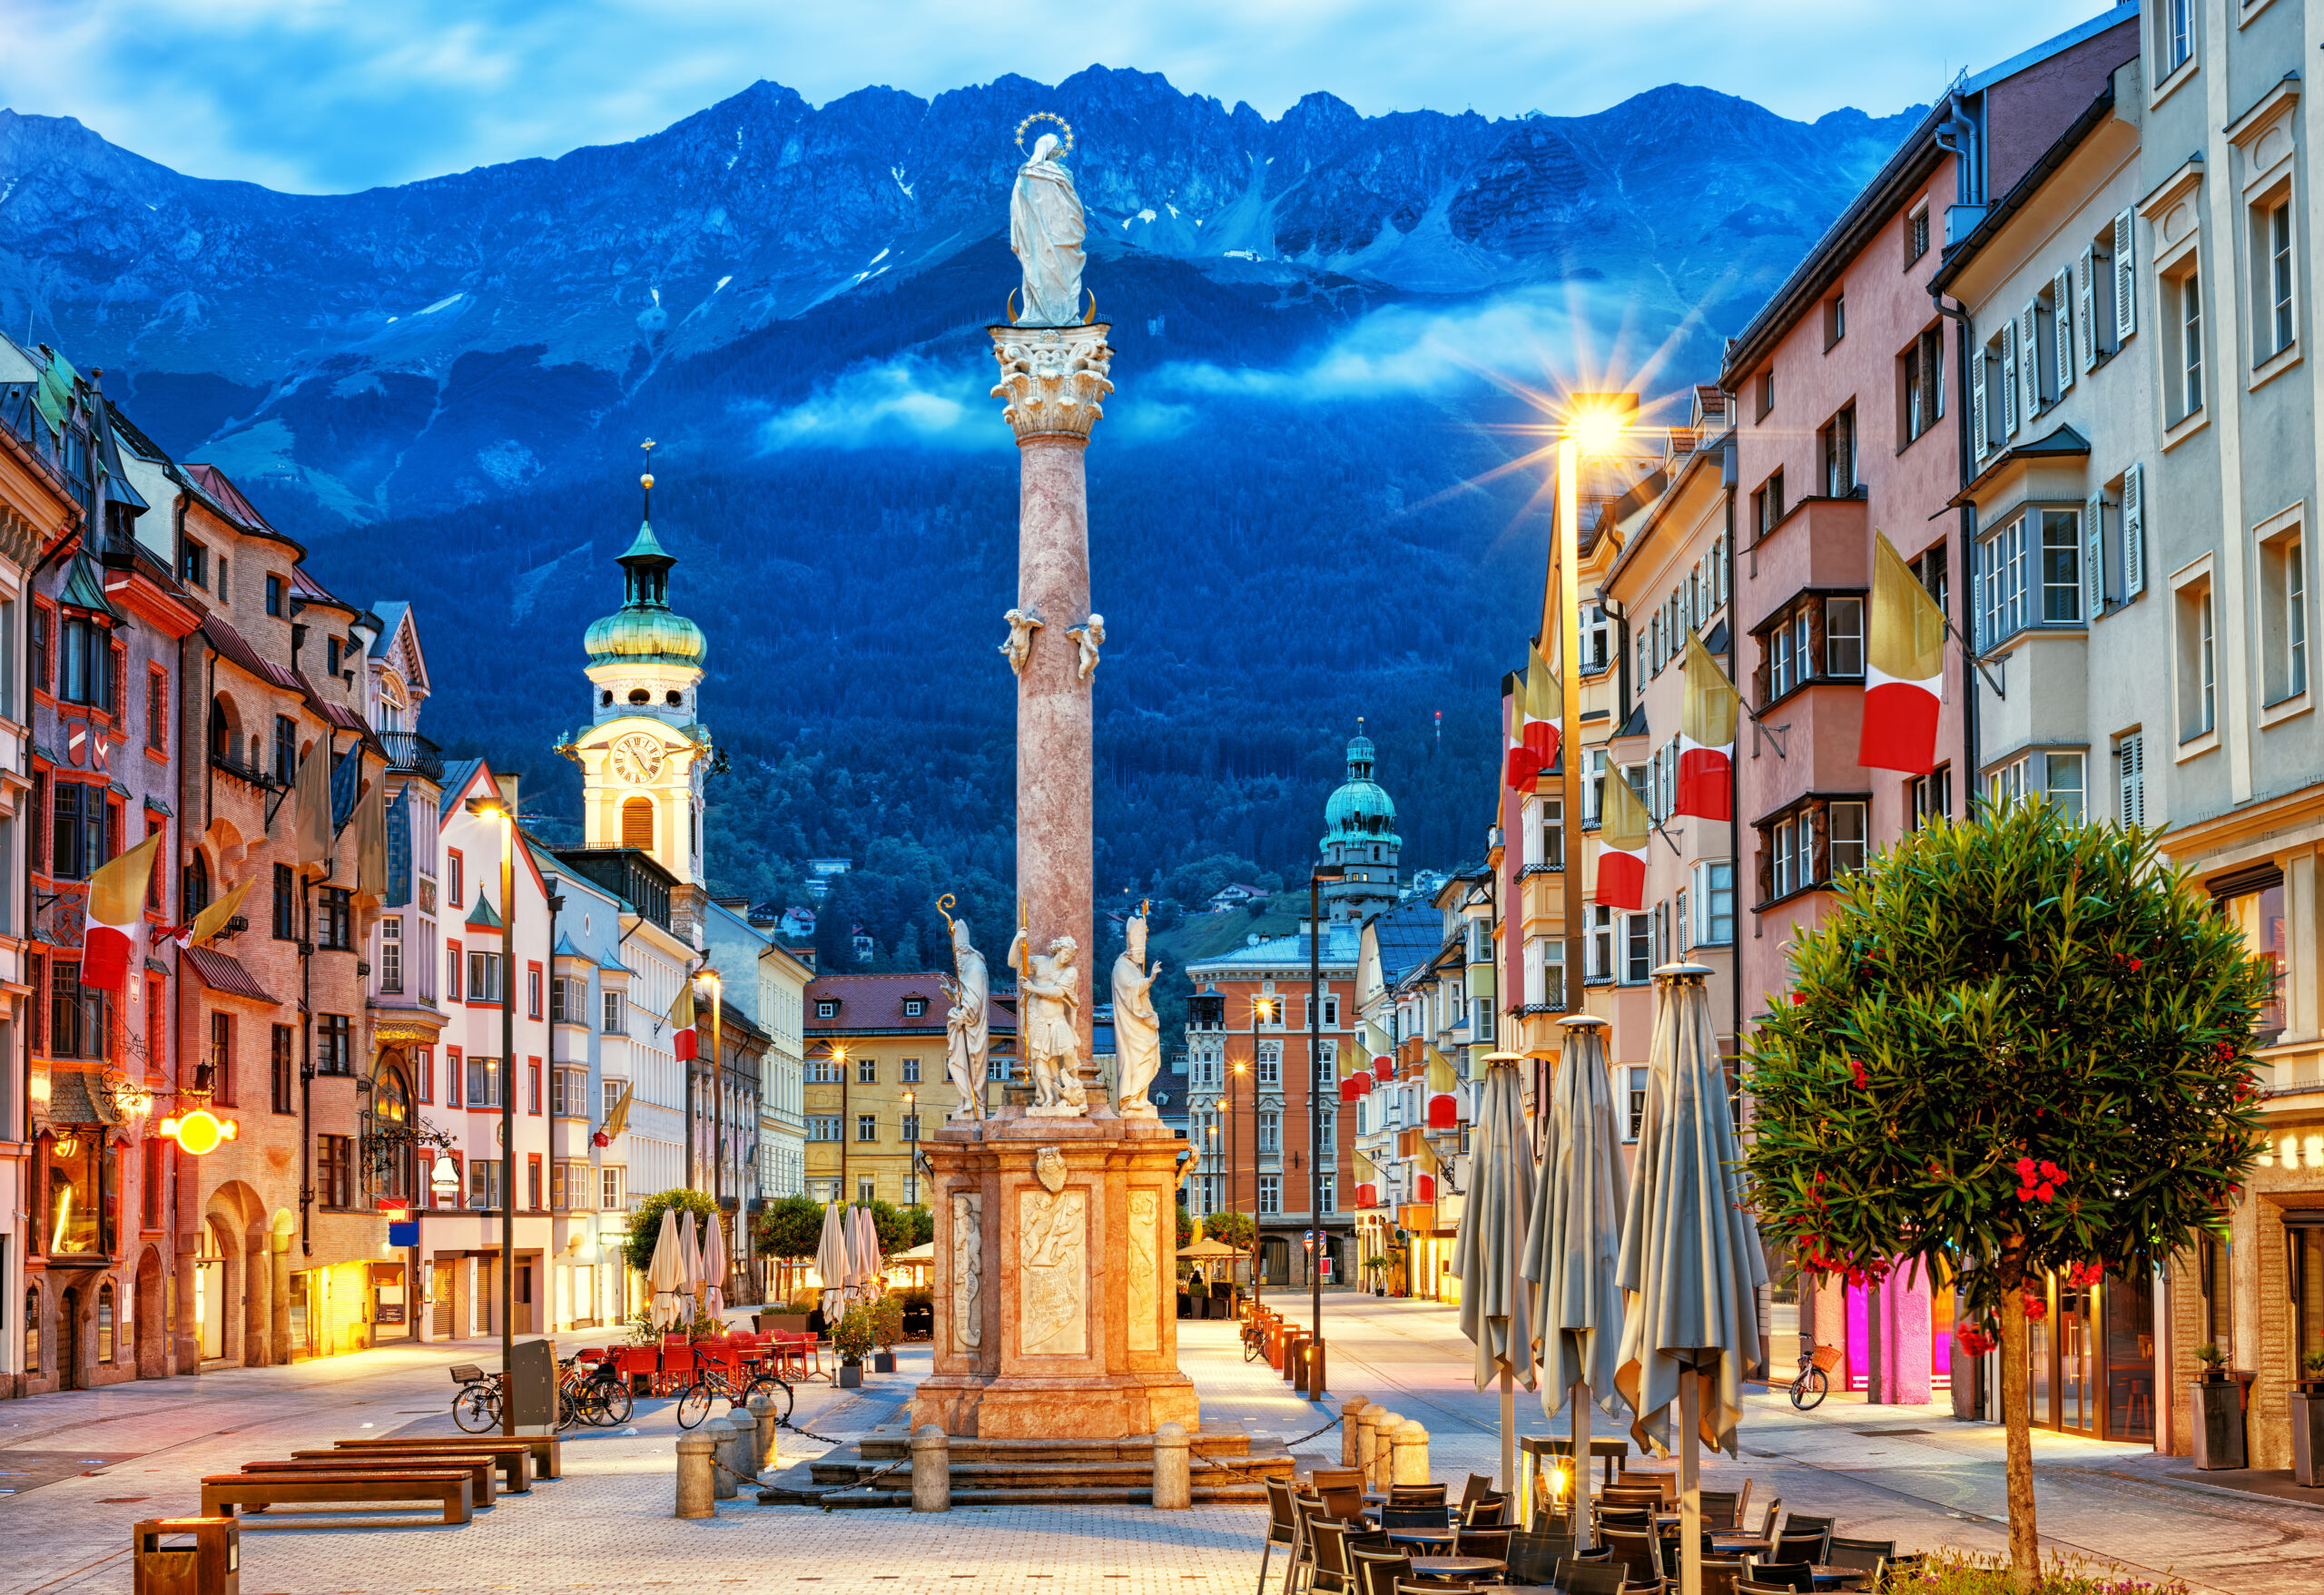 Old town in the alps with colourful houses on a square and a statue with saints